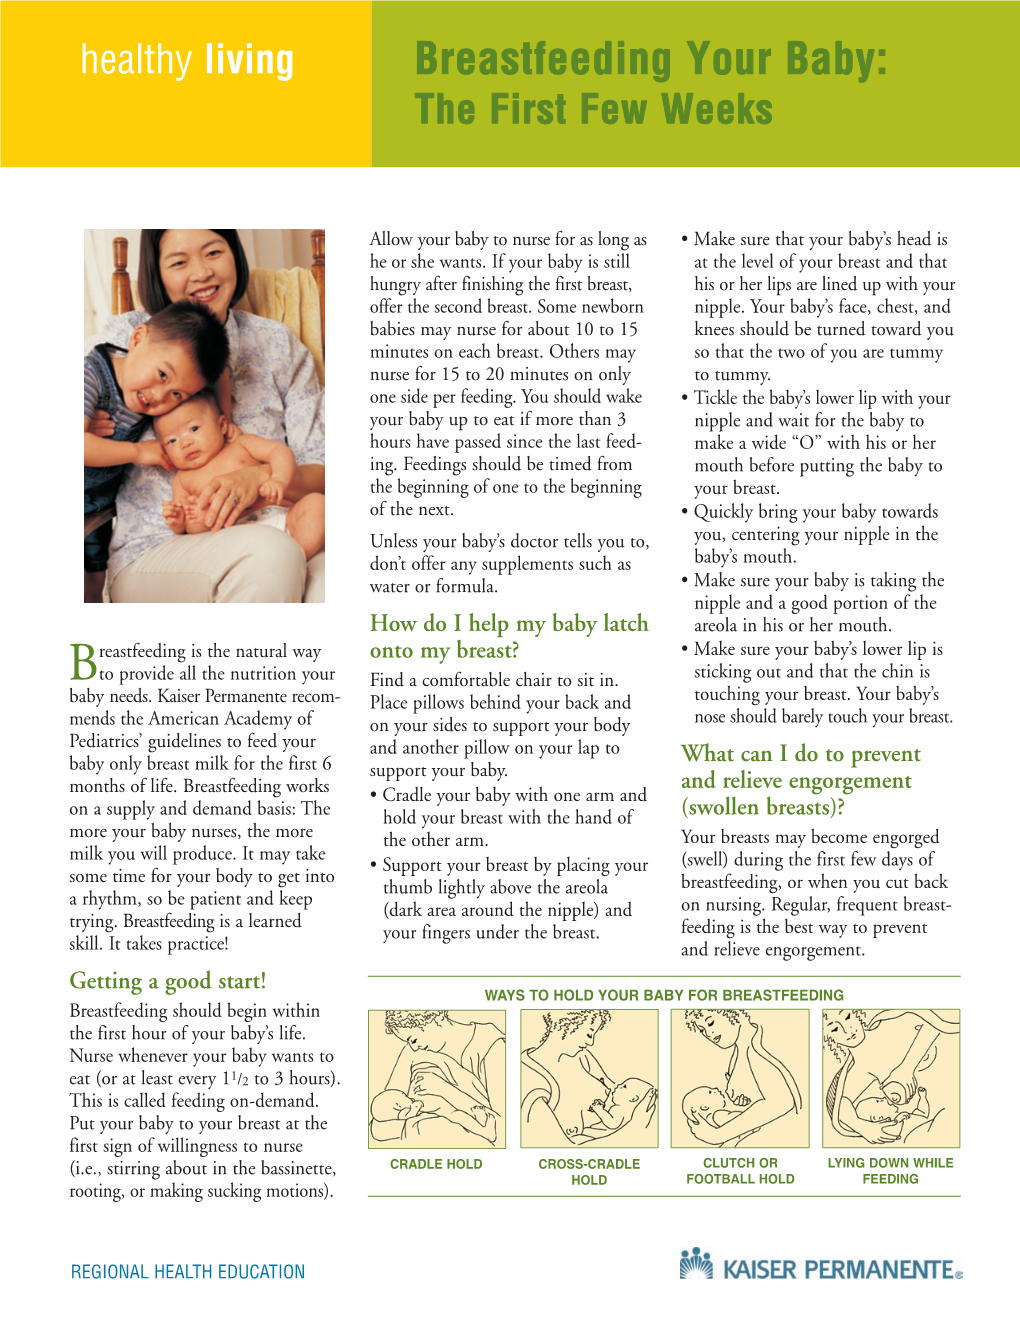 Breastfeeding Your Baby: the First Few Weeks